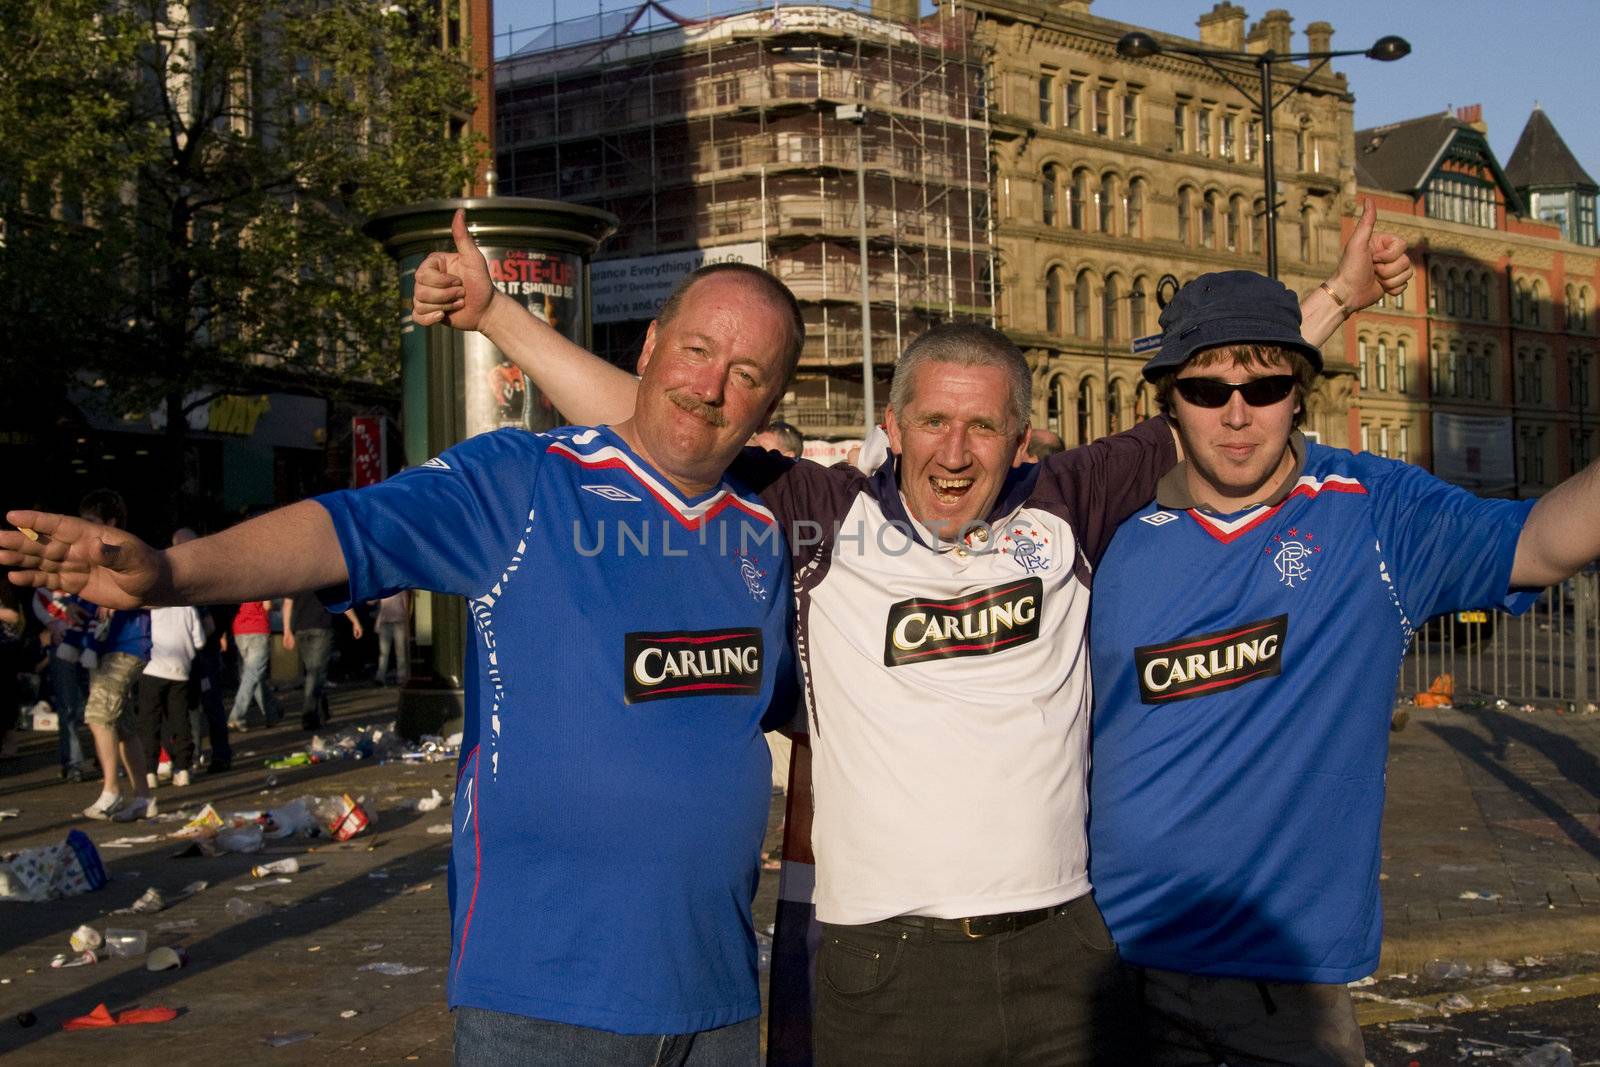 Football supporters Sunny day by cvail73